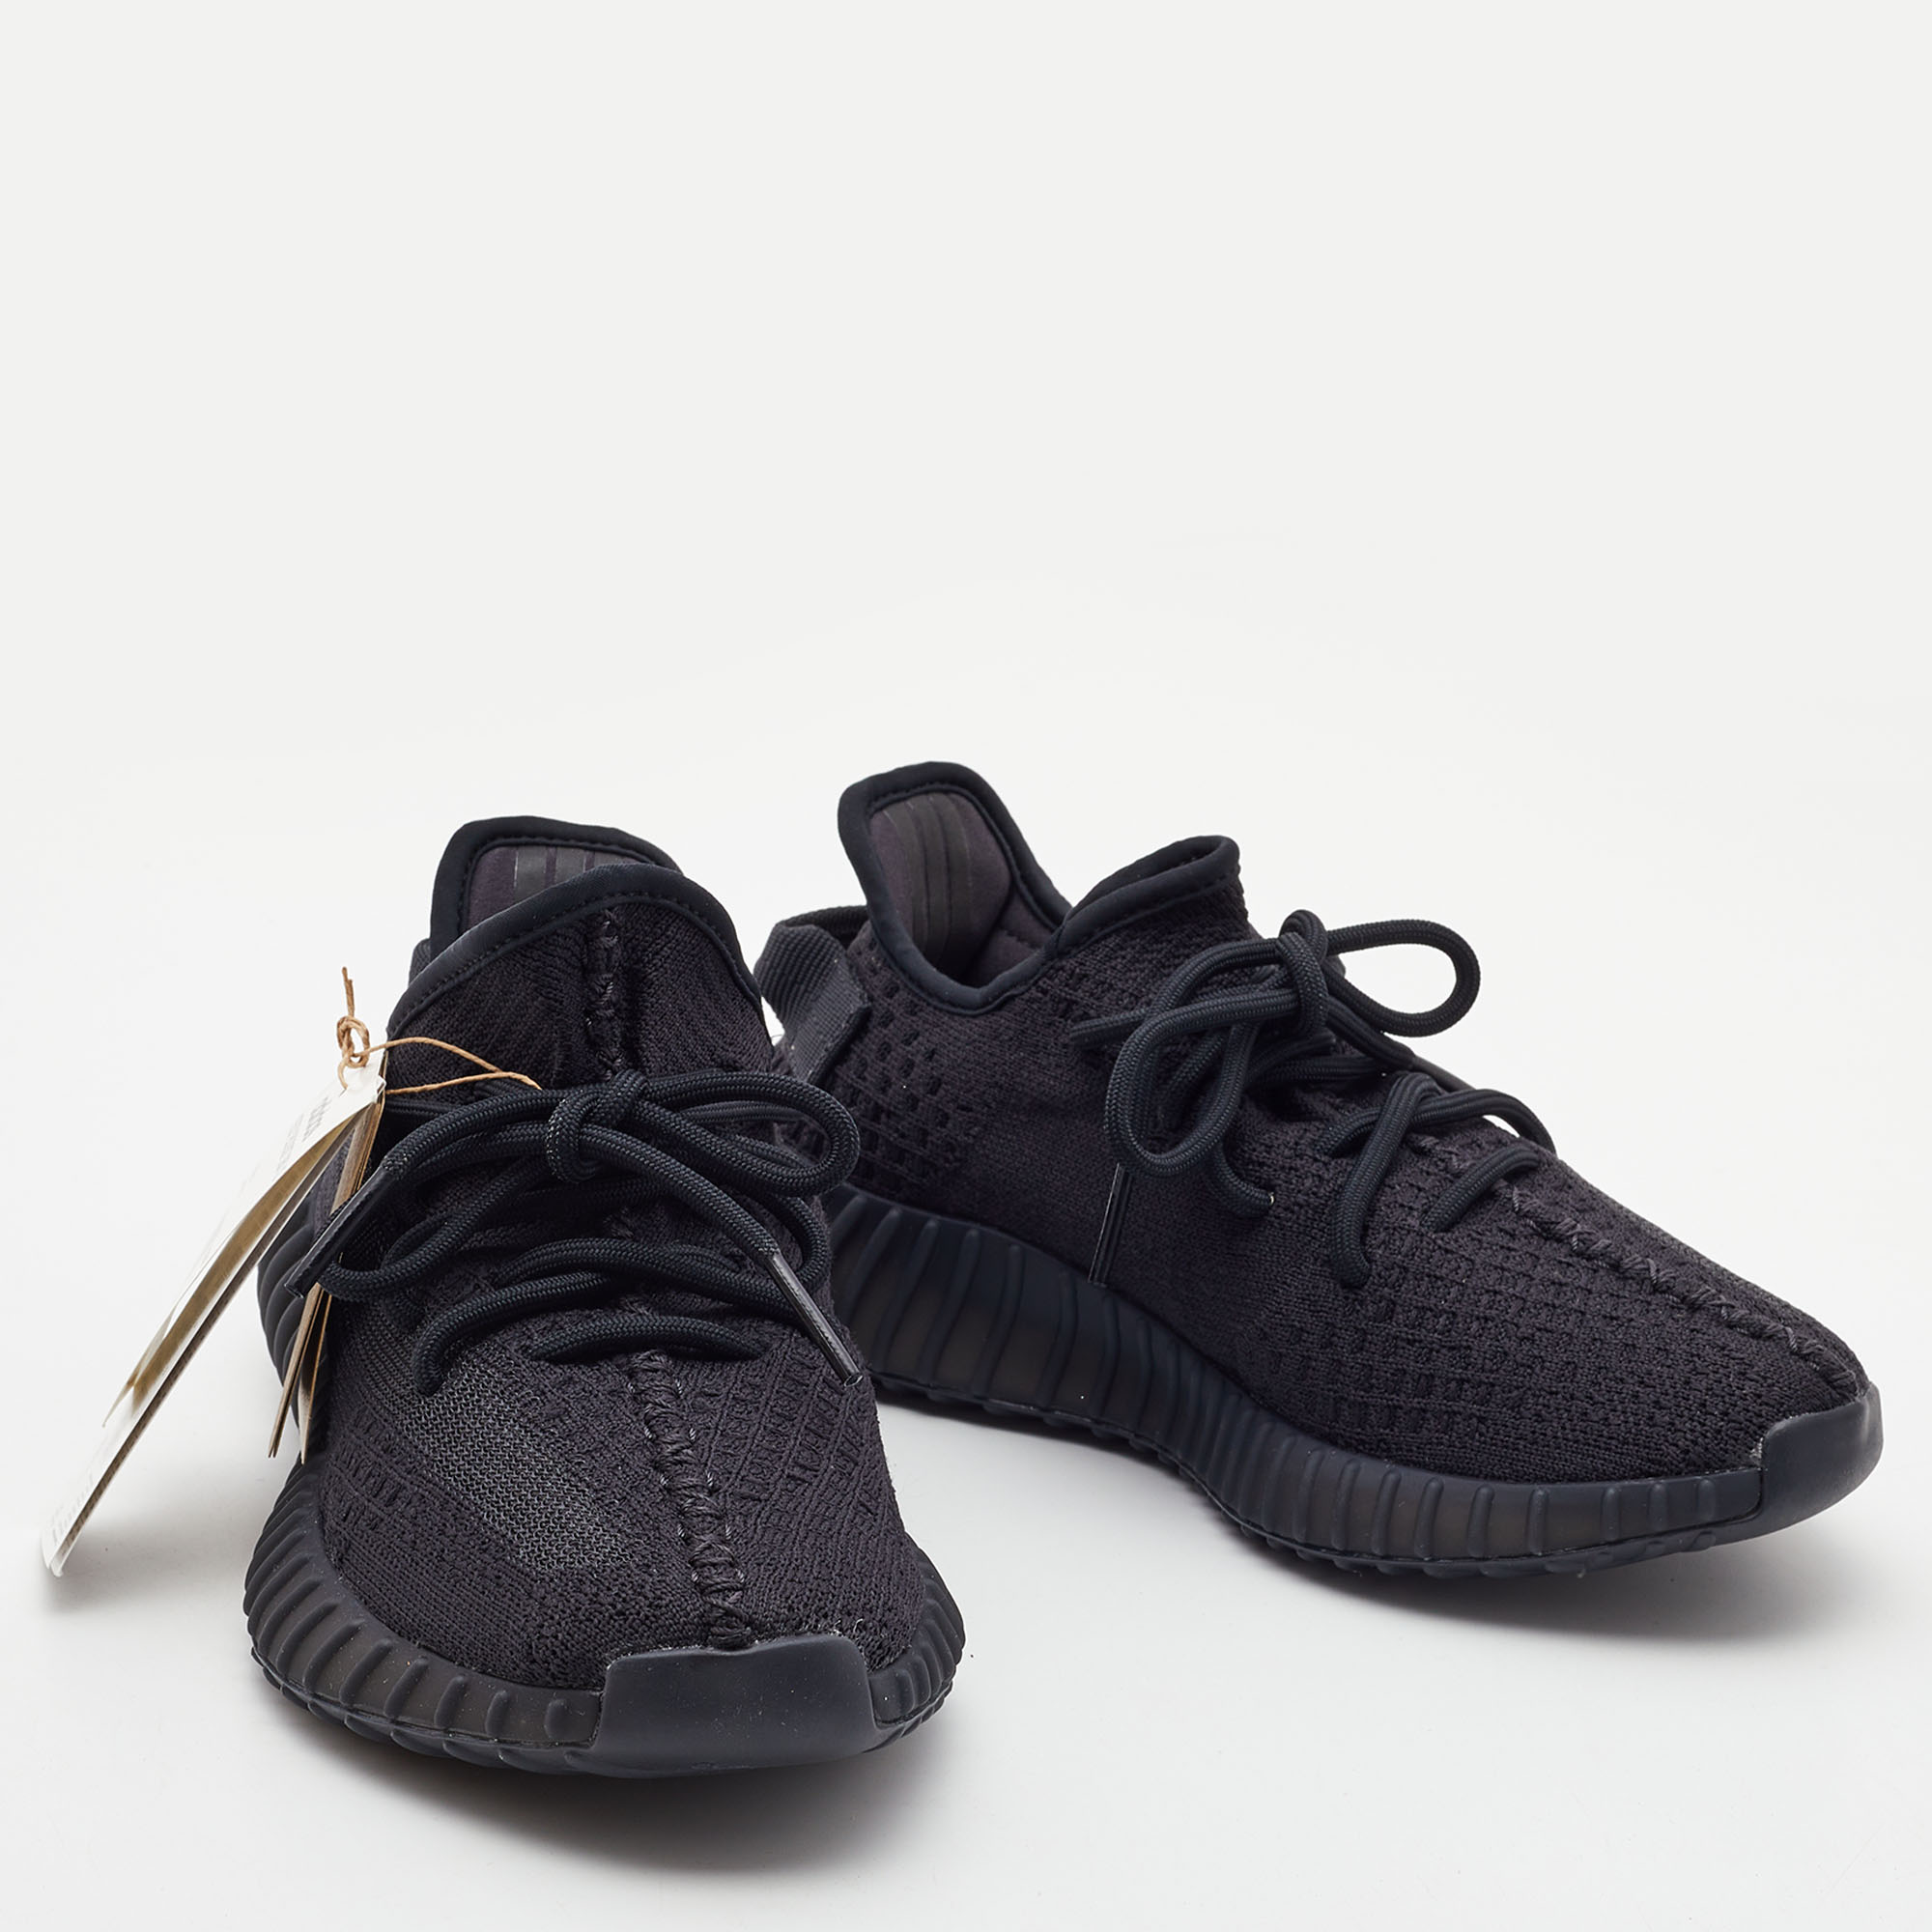 Yeezy X Adidas Black Fabric Boost 350 V2 Cinder Sneakers Size 38